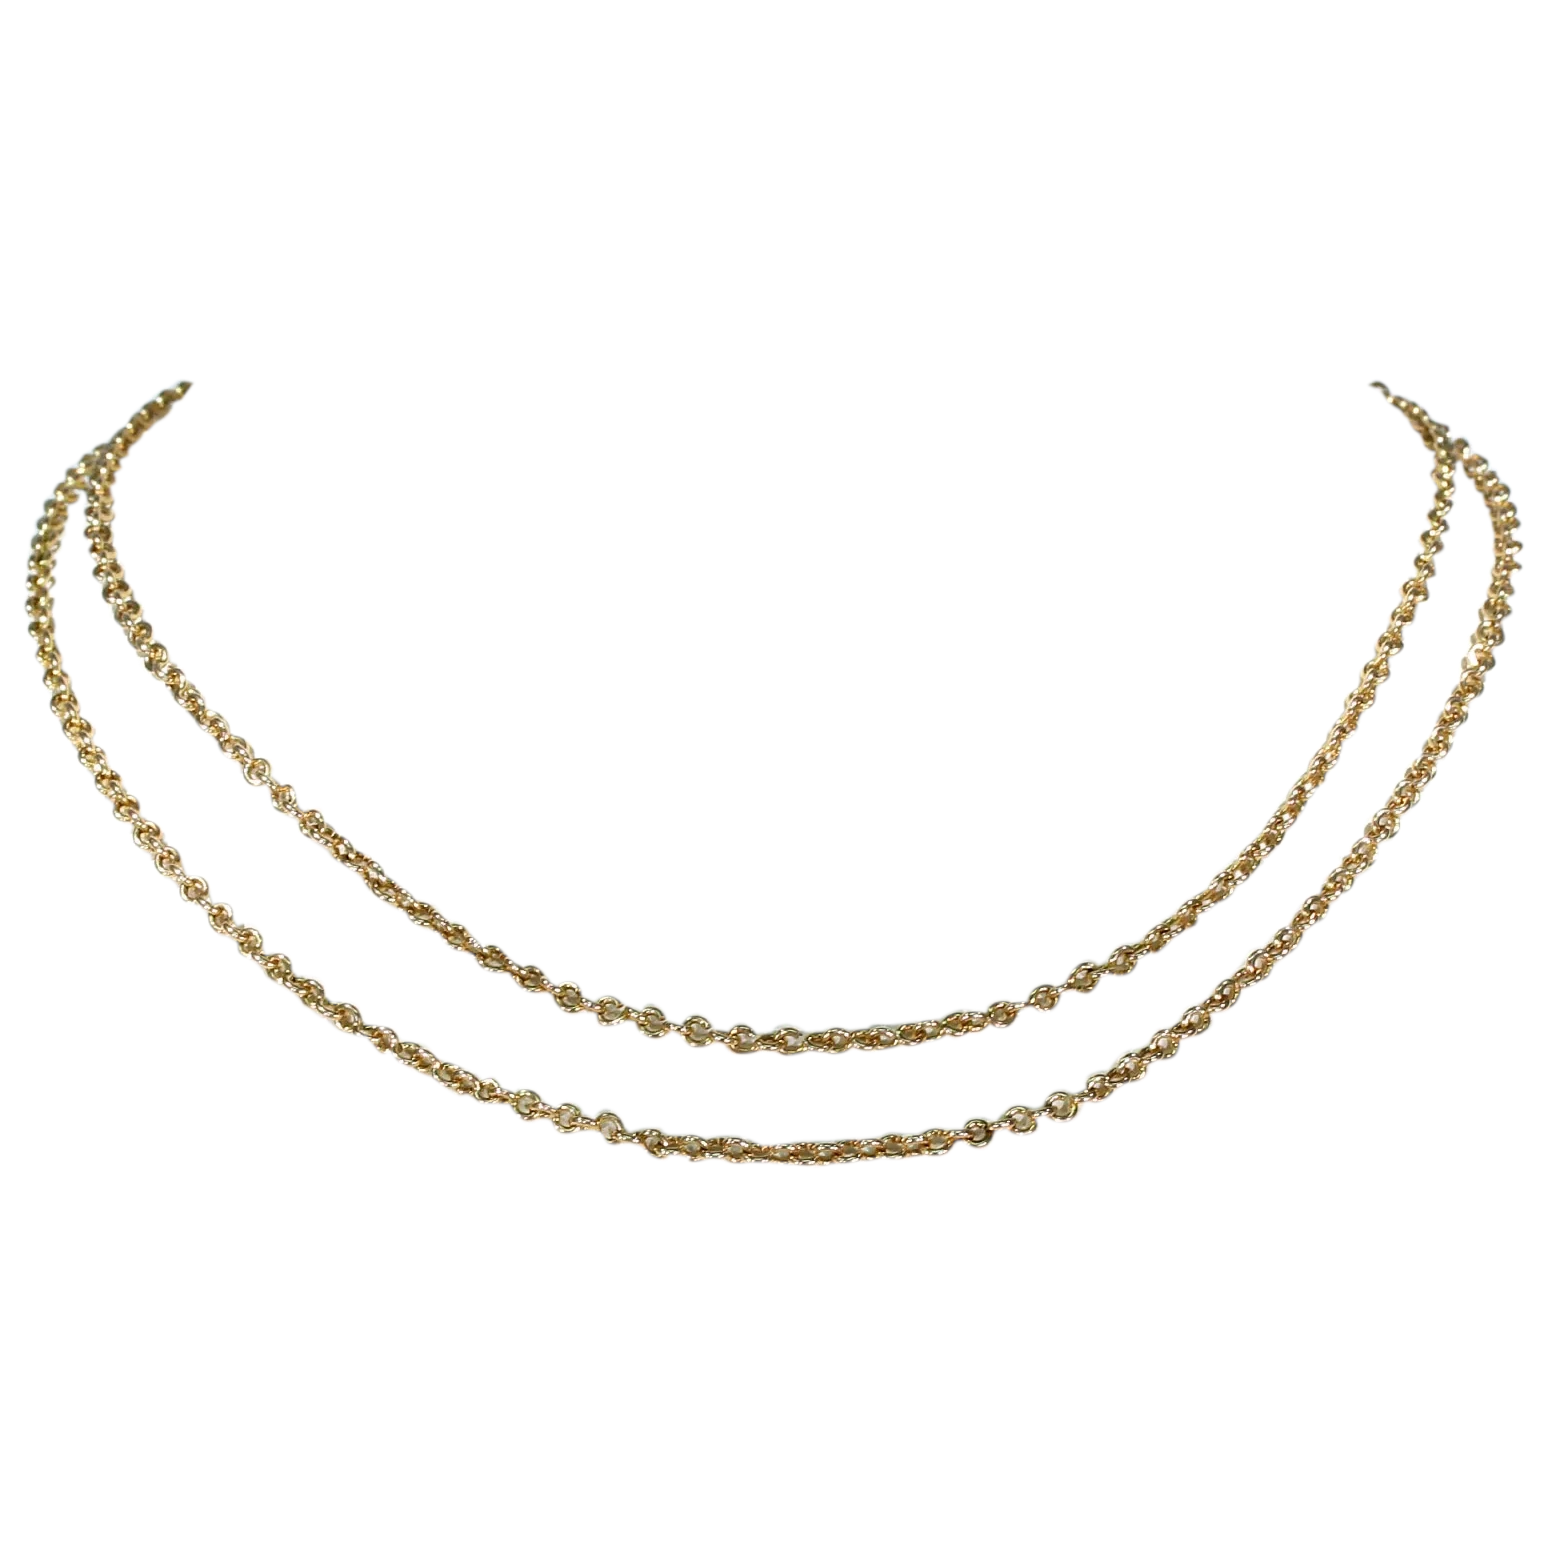 Edwardian 9k Gold Link Chain 28 inches Long Necklace